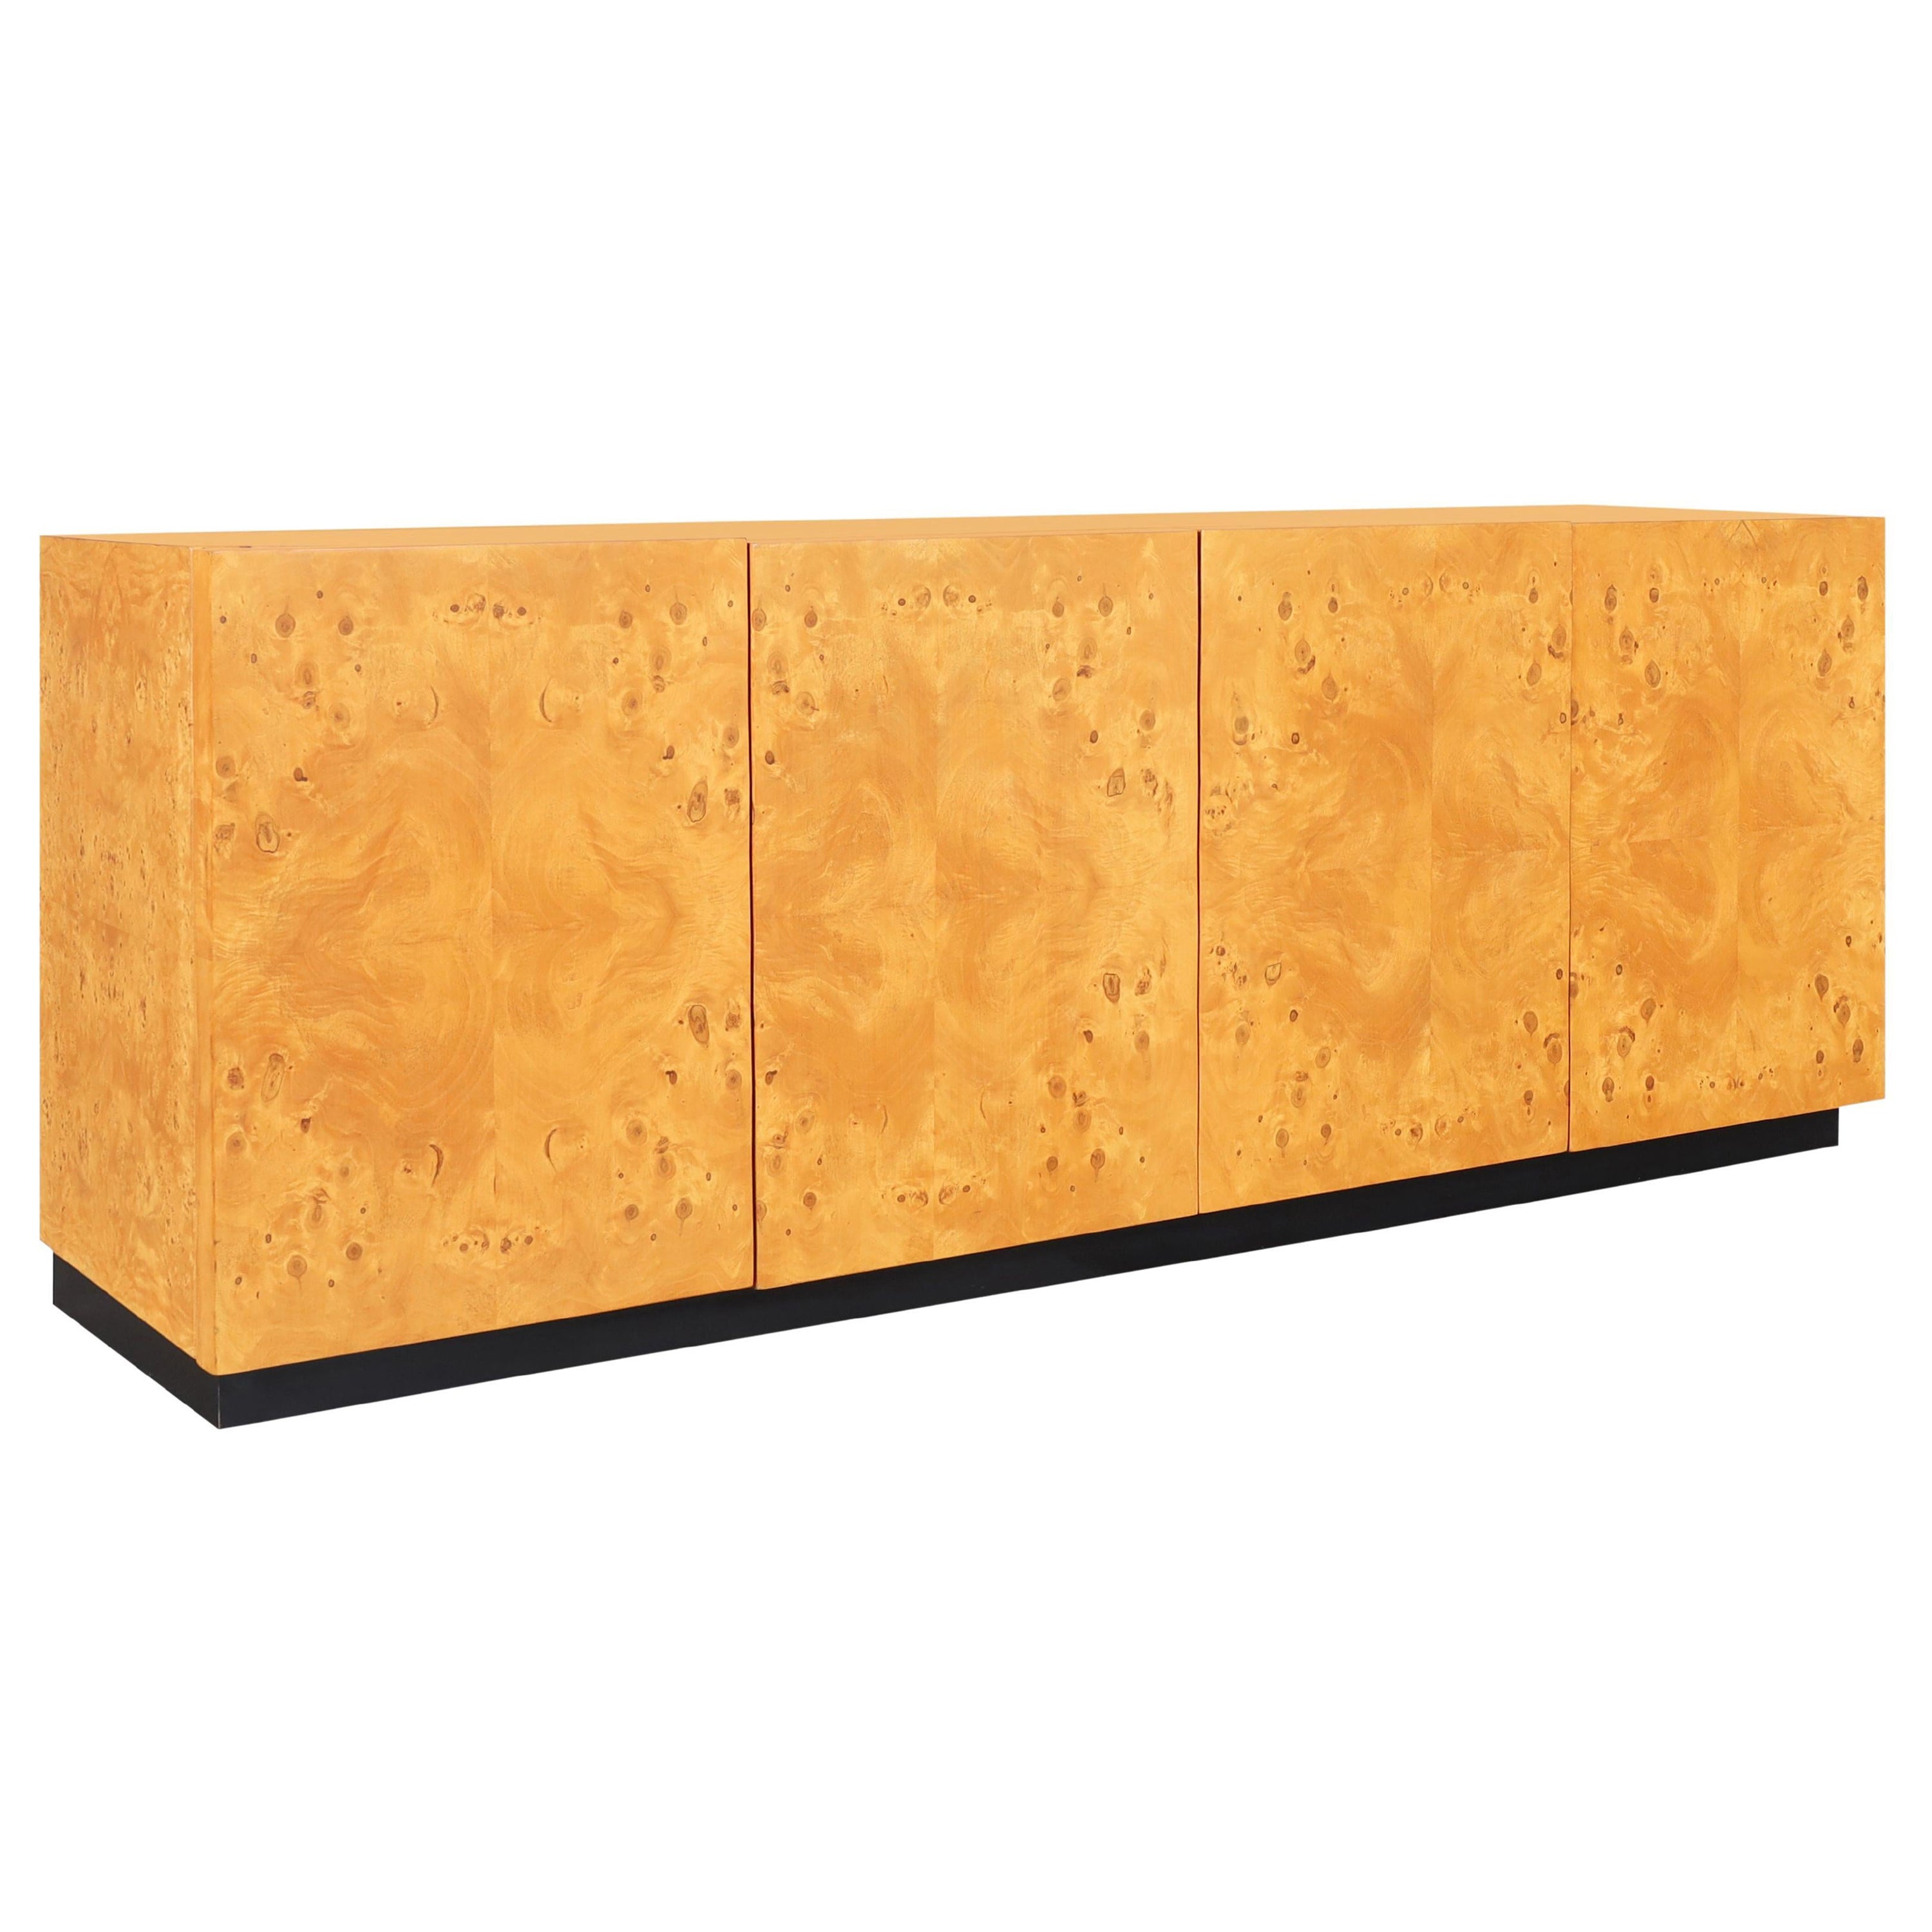 Dillingham Manufacturing Company Credenzas